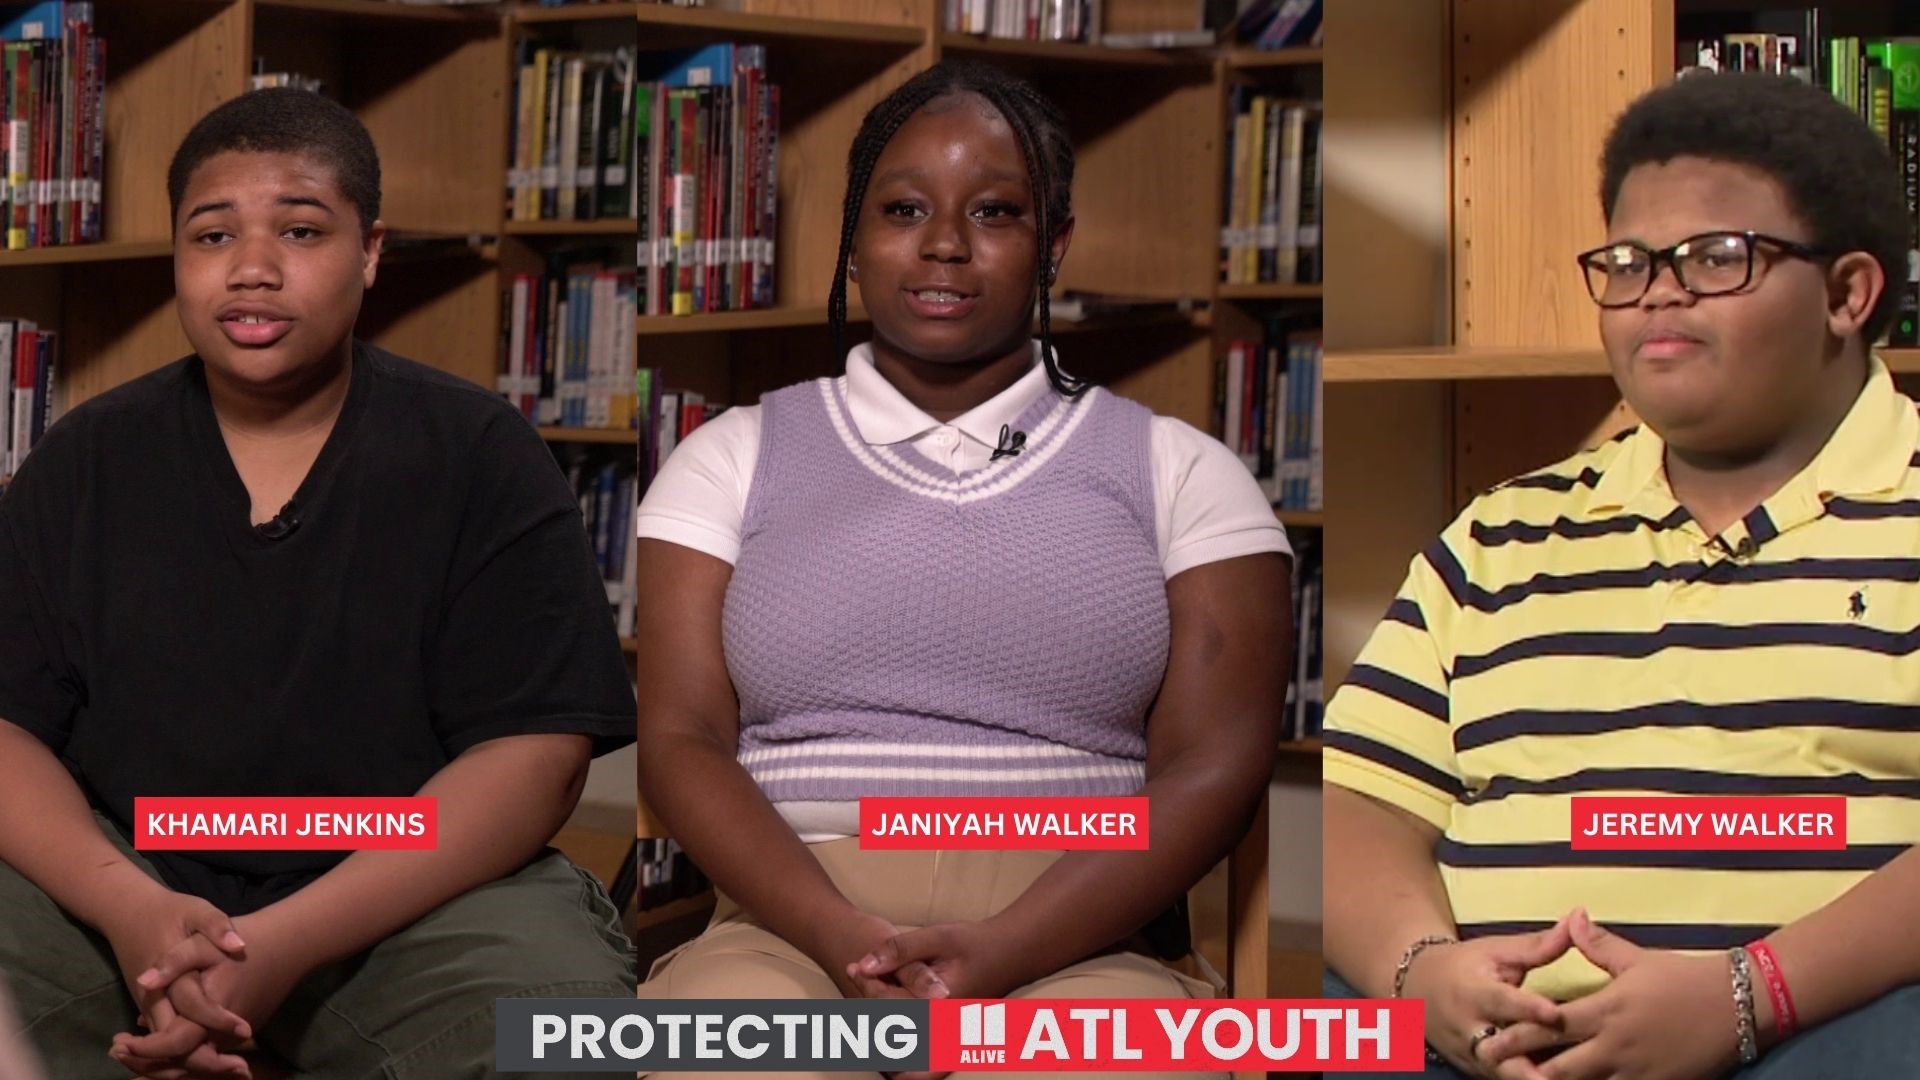 In preparation for our second community conversation, 11Alive sat down with three teenagers at Columbia High School to discuss the impact of social media.